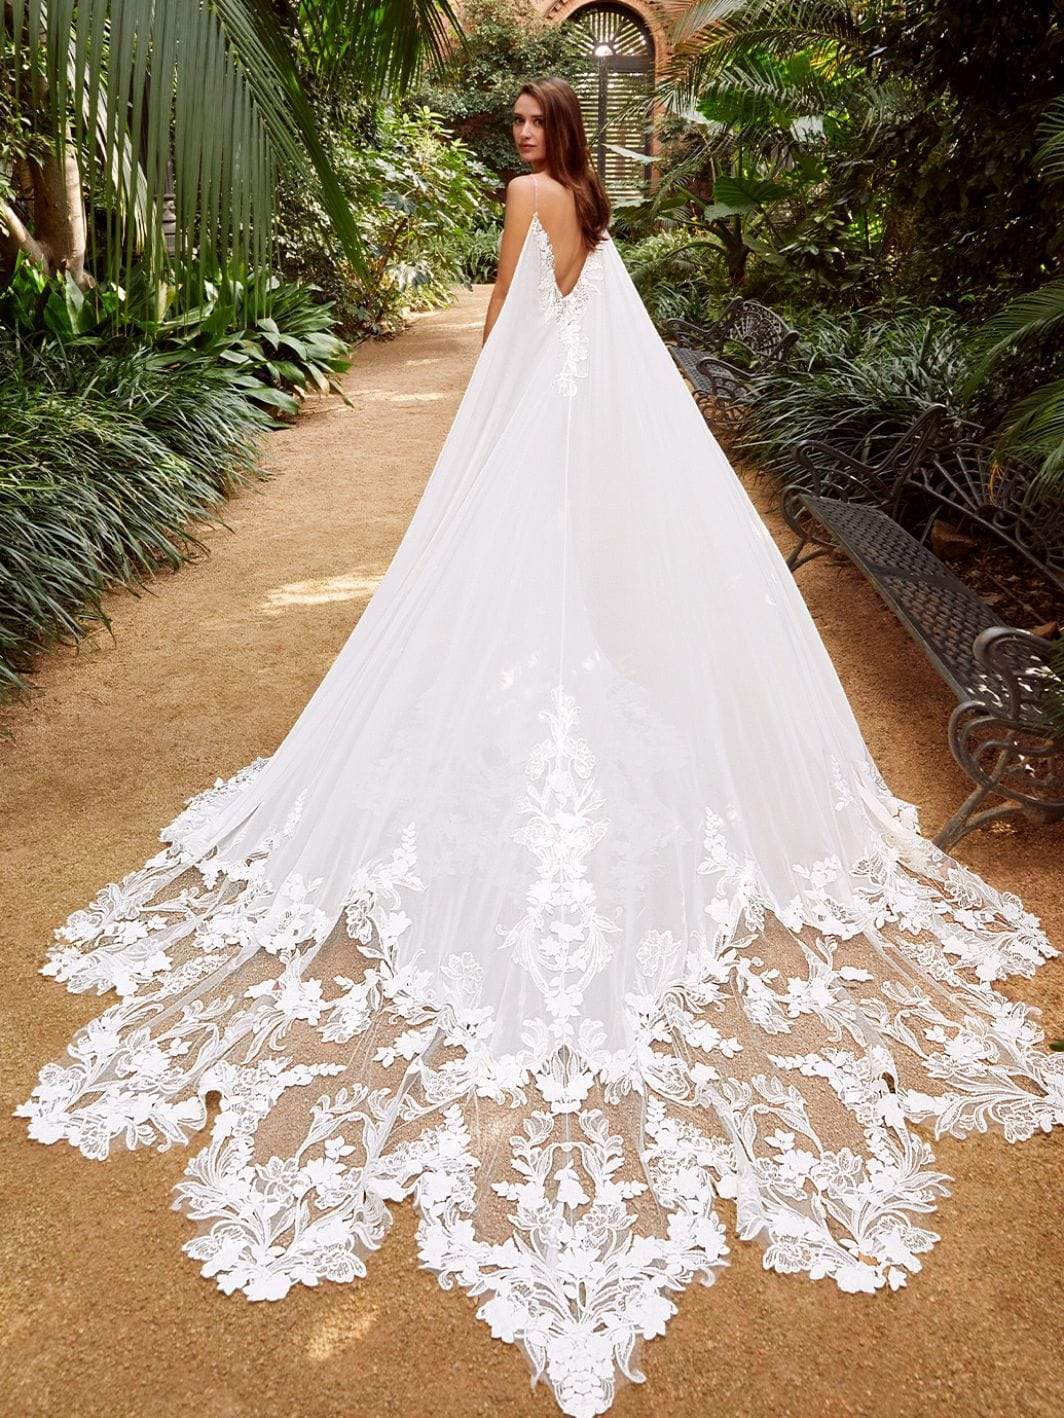 Pearl Wedding Dress Designed by Enzoani Now Available at La Maison